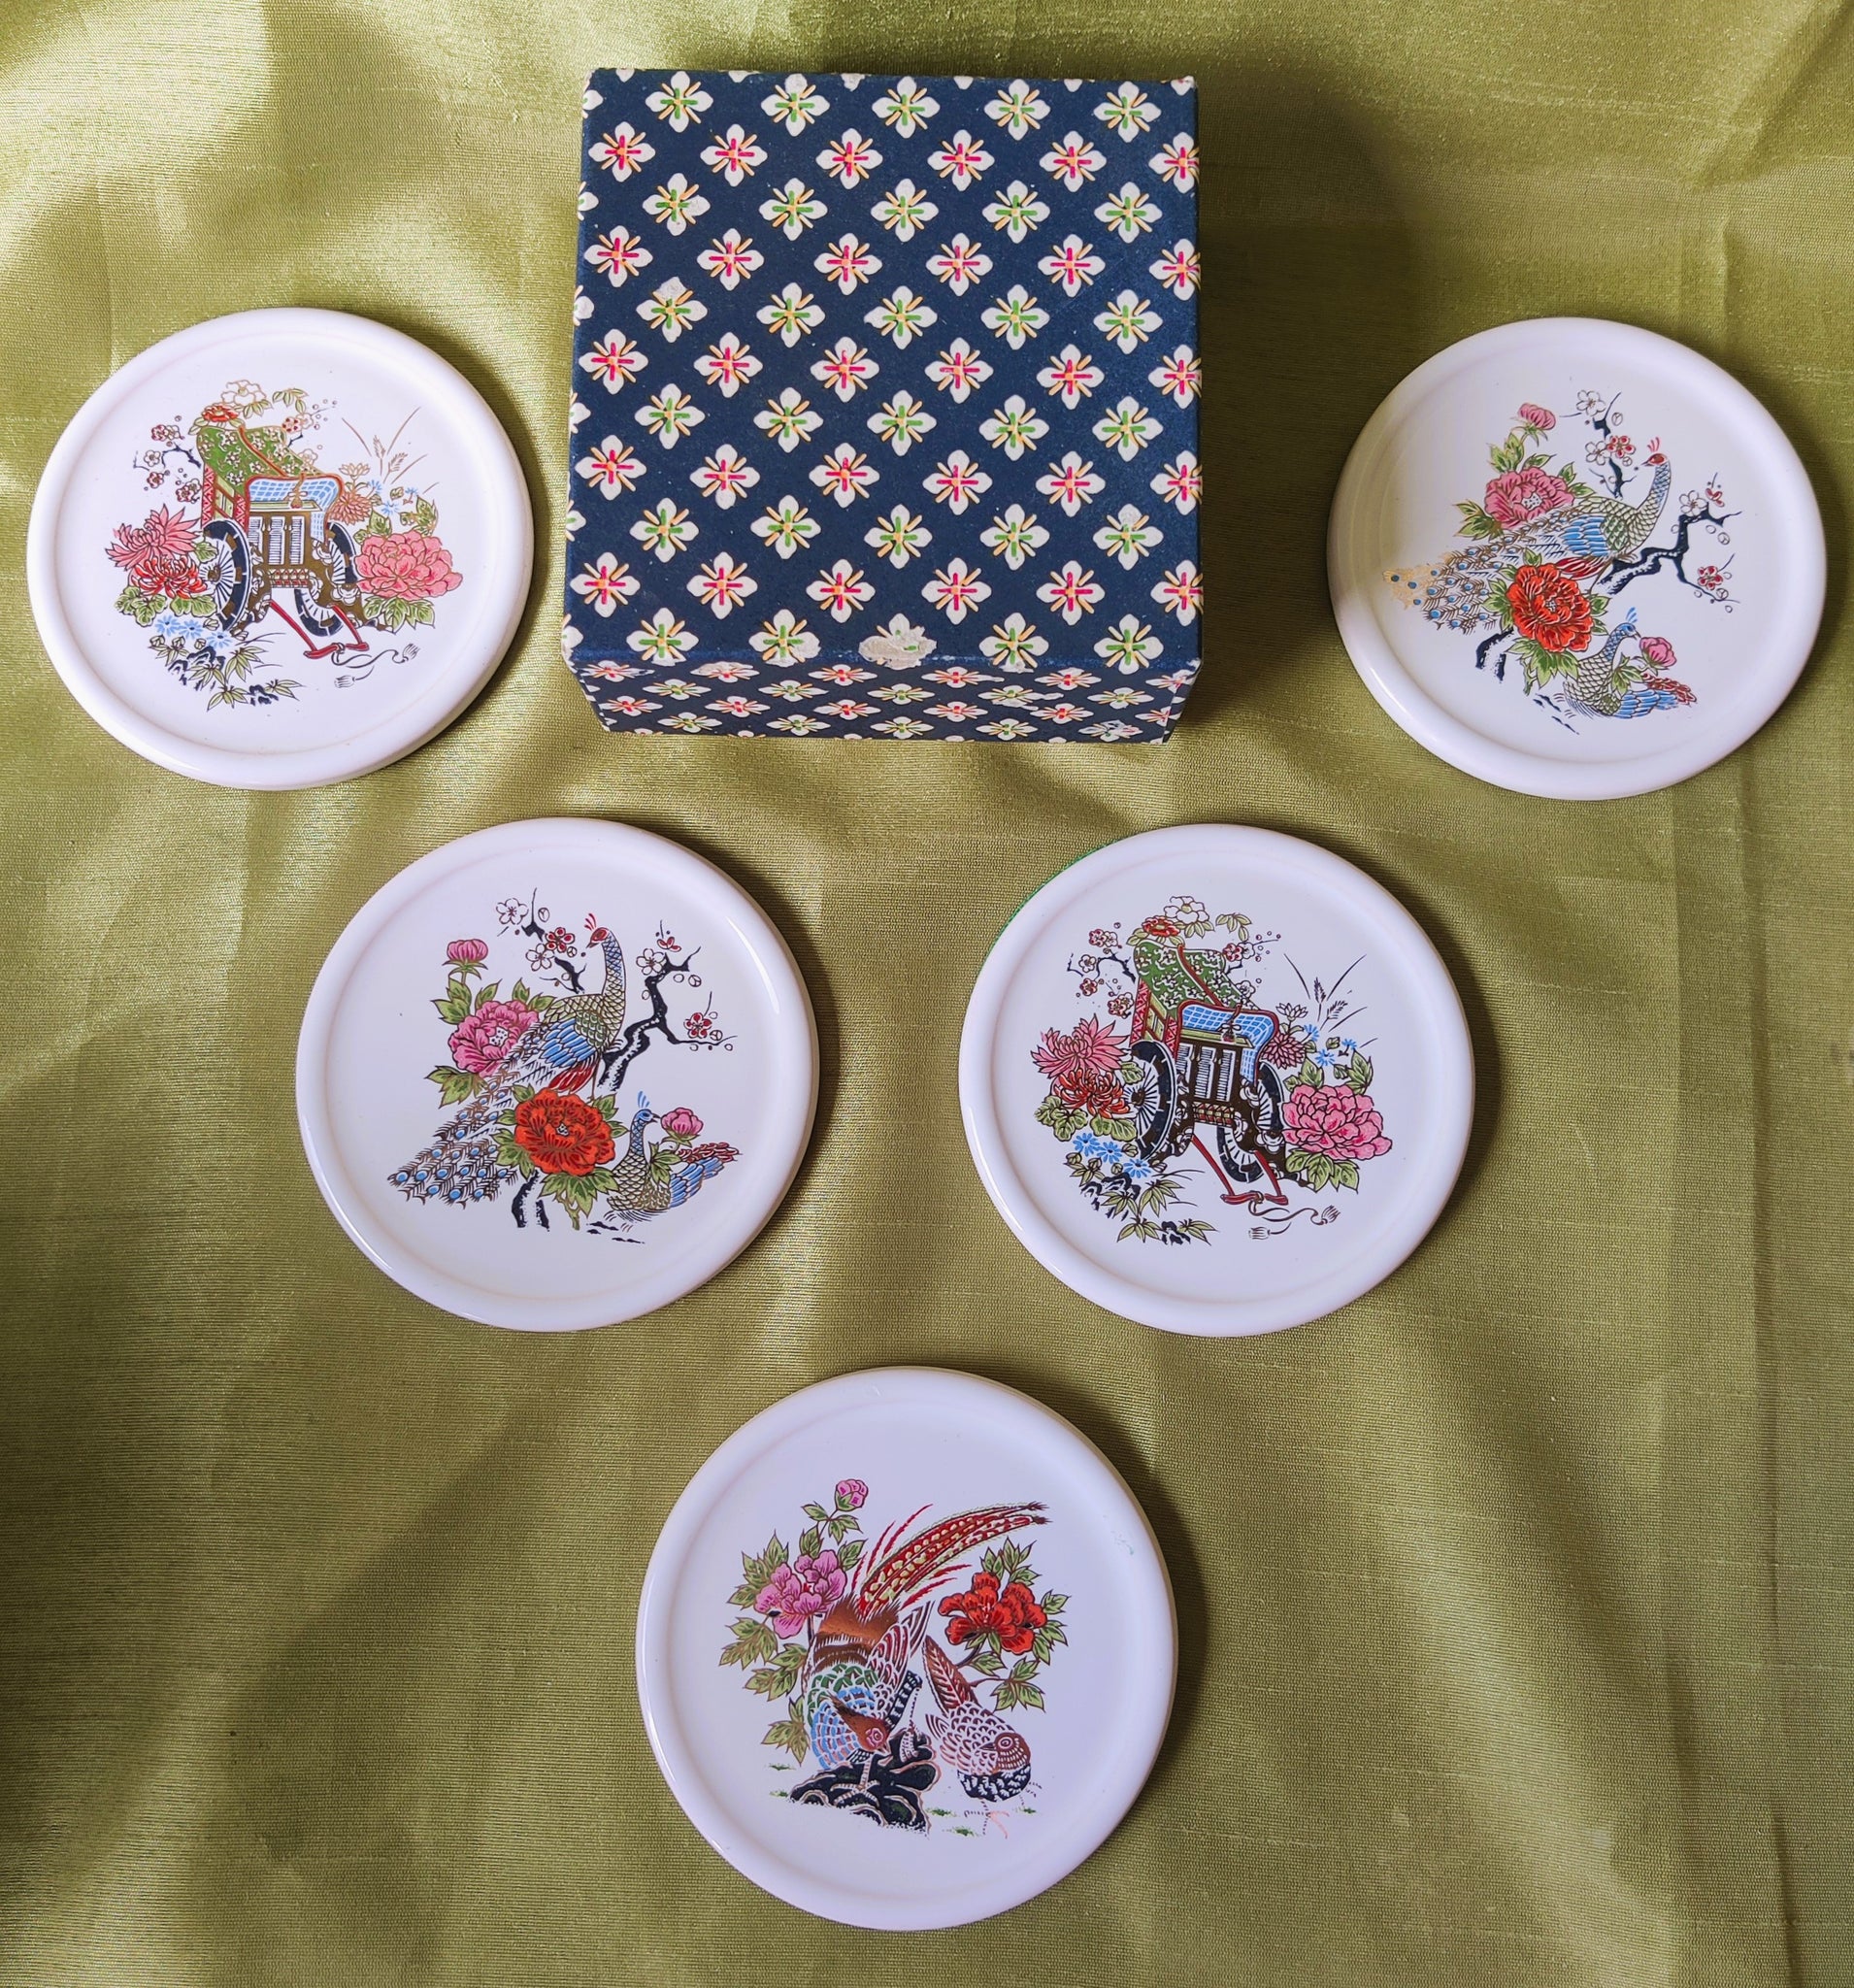 Set of 5 Porcelain Chinese Bird Coasters in Box